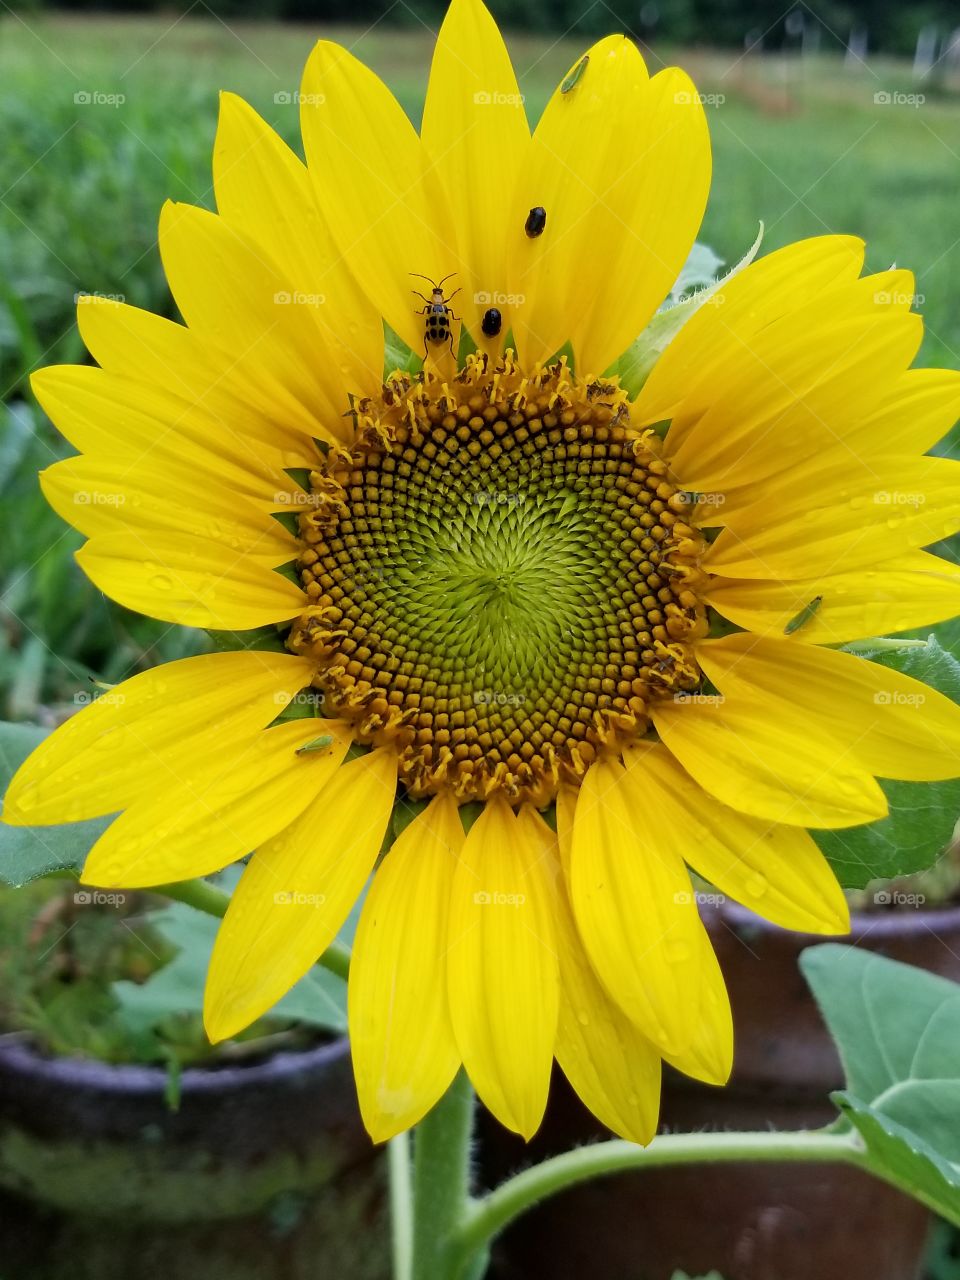 Sunflower with insects on it after the rain